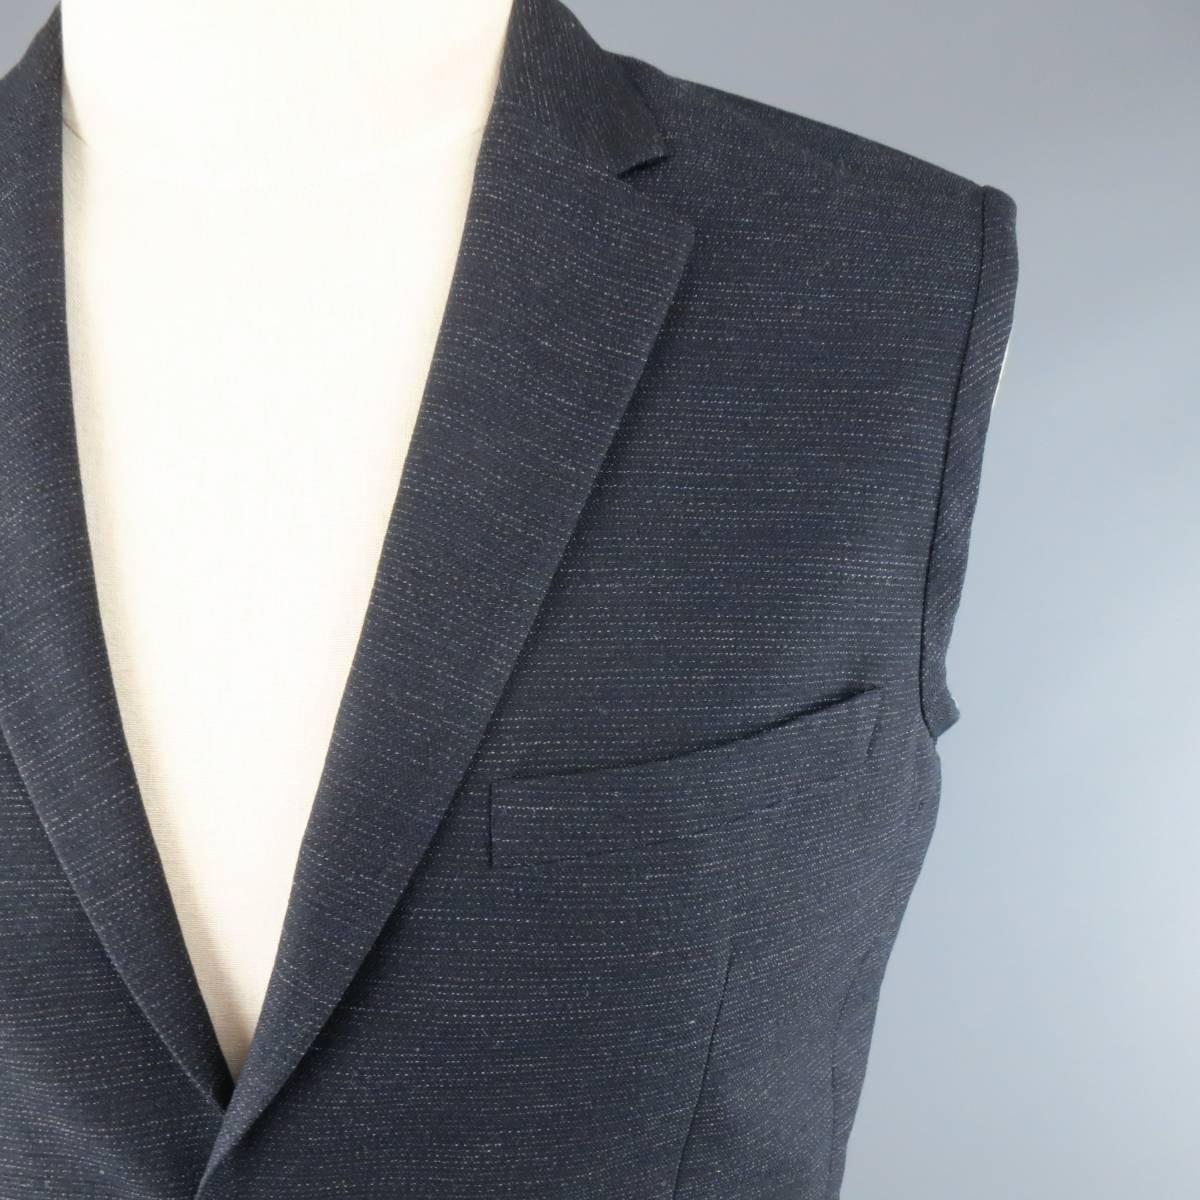 This MARNI sleeveless sport coat vest comes in a navy and gray textured wool blend fabric and features a notch lapel, two button closure, and single vented back. Made in Italy.
 
Excellent Pre-Owned Condition.
Marked: IT 48
 
Measurements:
